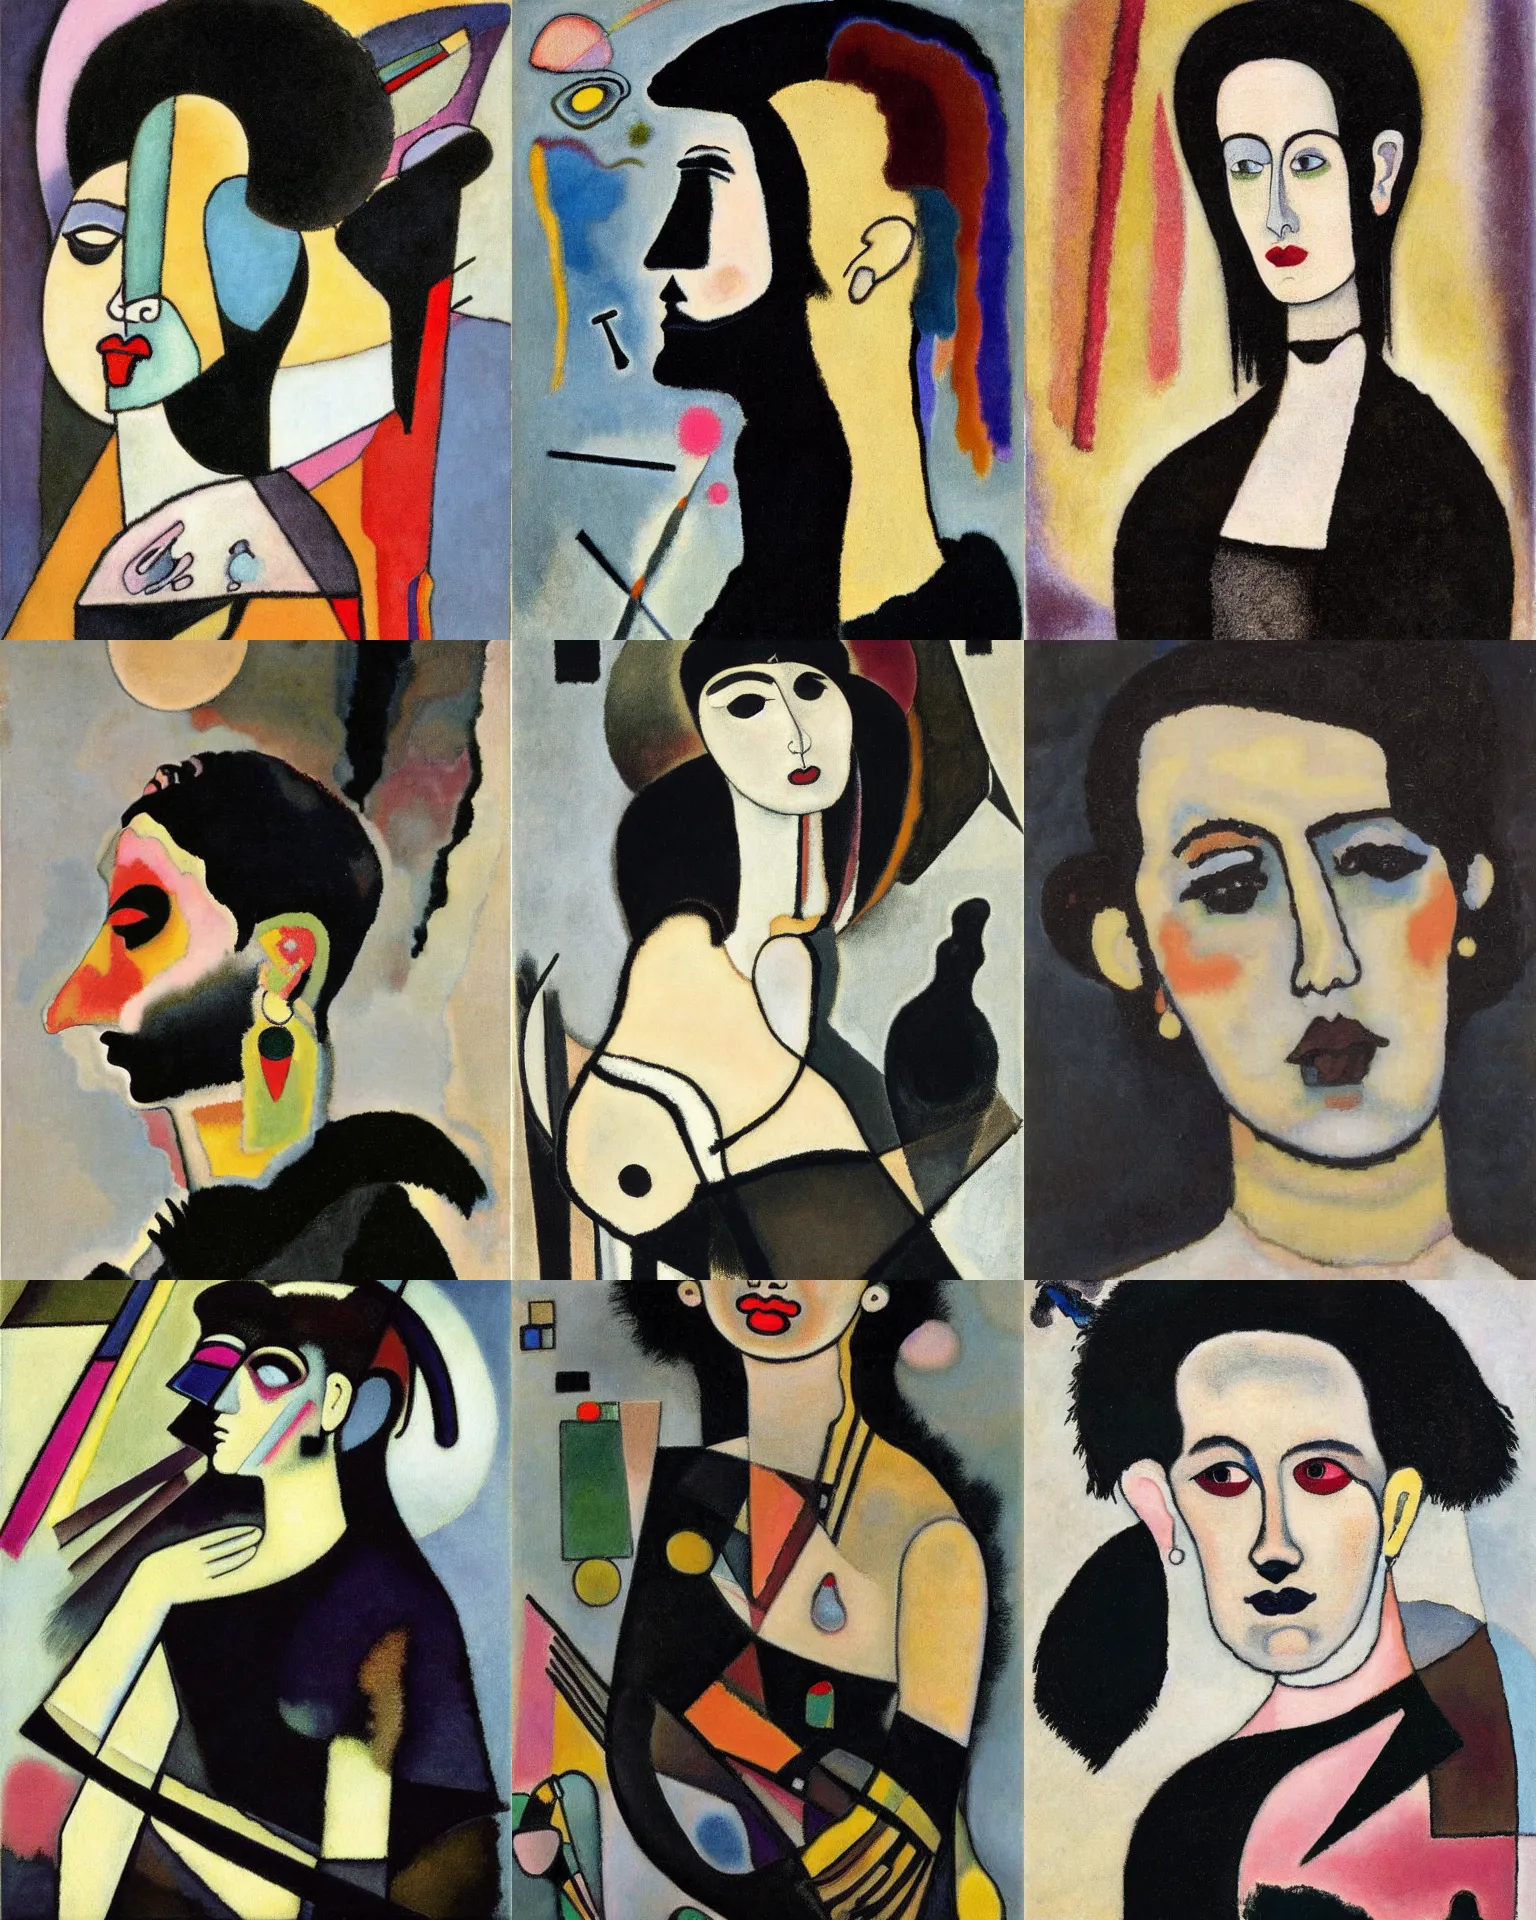 Prompt: A goth portrait painted by Wassily Kandinsky. Her hair is dark brown and cut into a short, messy pixie cut. She has a slightly rounded face, with a pointed chin, large entirely-black eyes, and a small nose. She is wearing a black tank top, a black leather jacket, a black knee-length skirt, a black choker, and black leather boots.